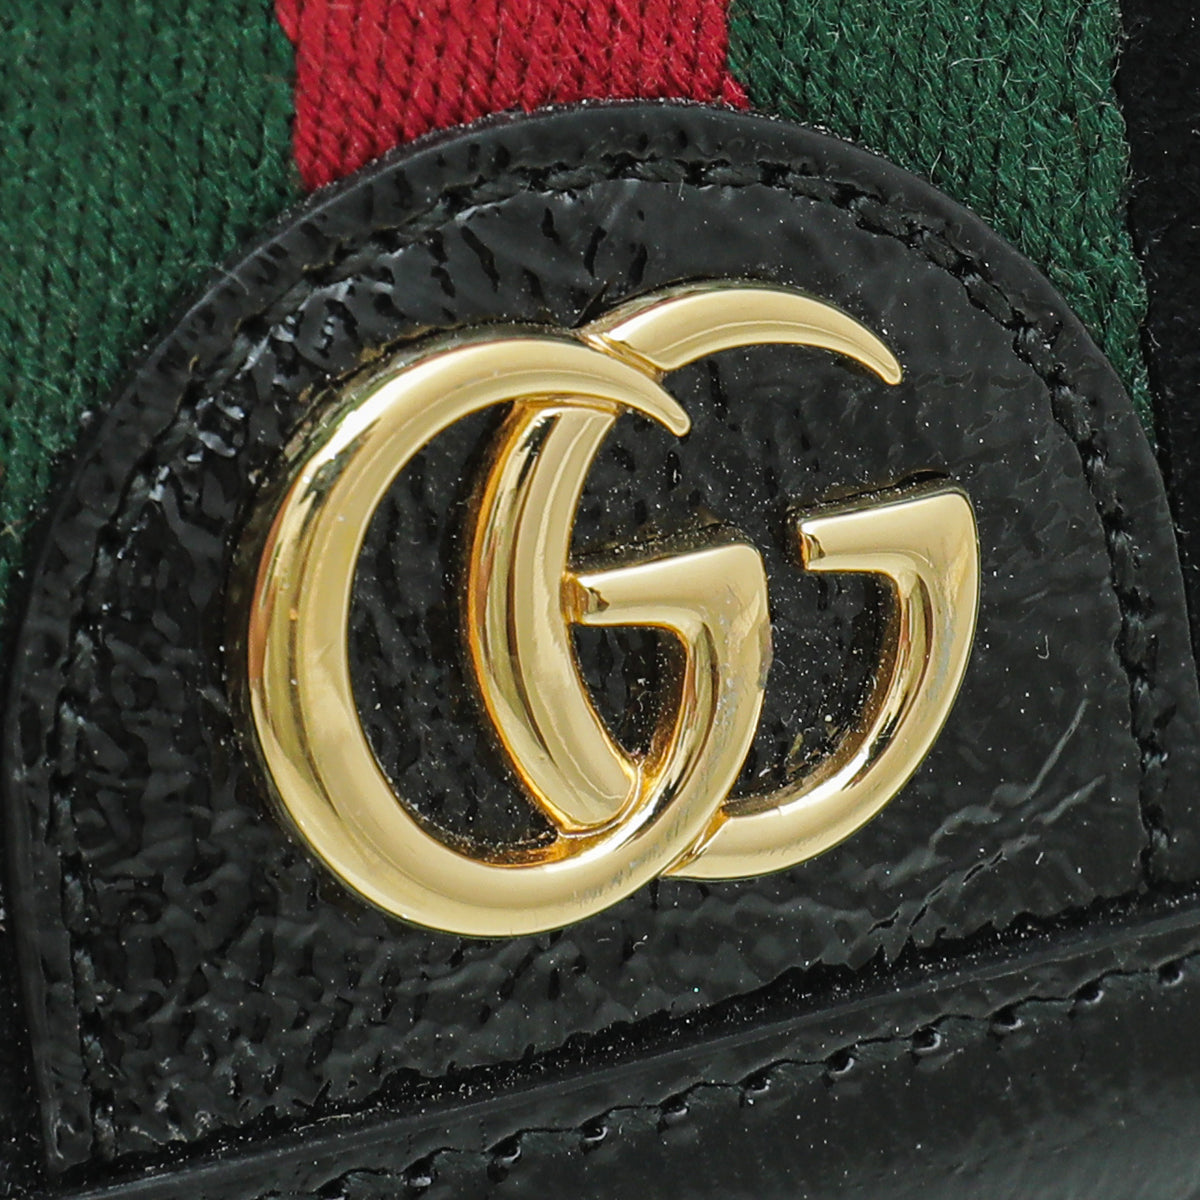 Gucci Black GG Ophidia Card Case Wallet